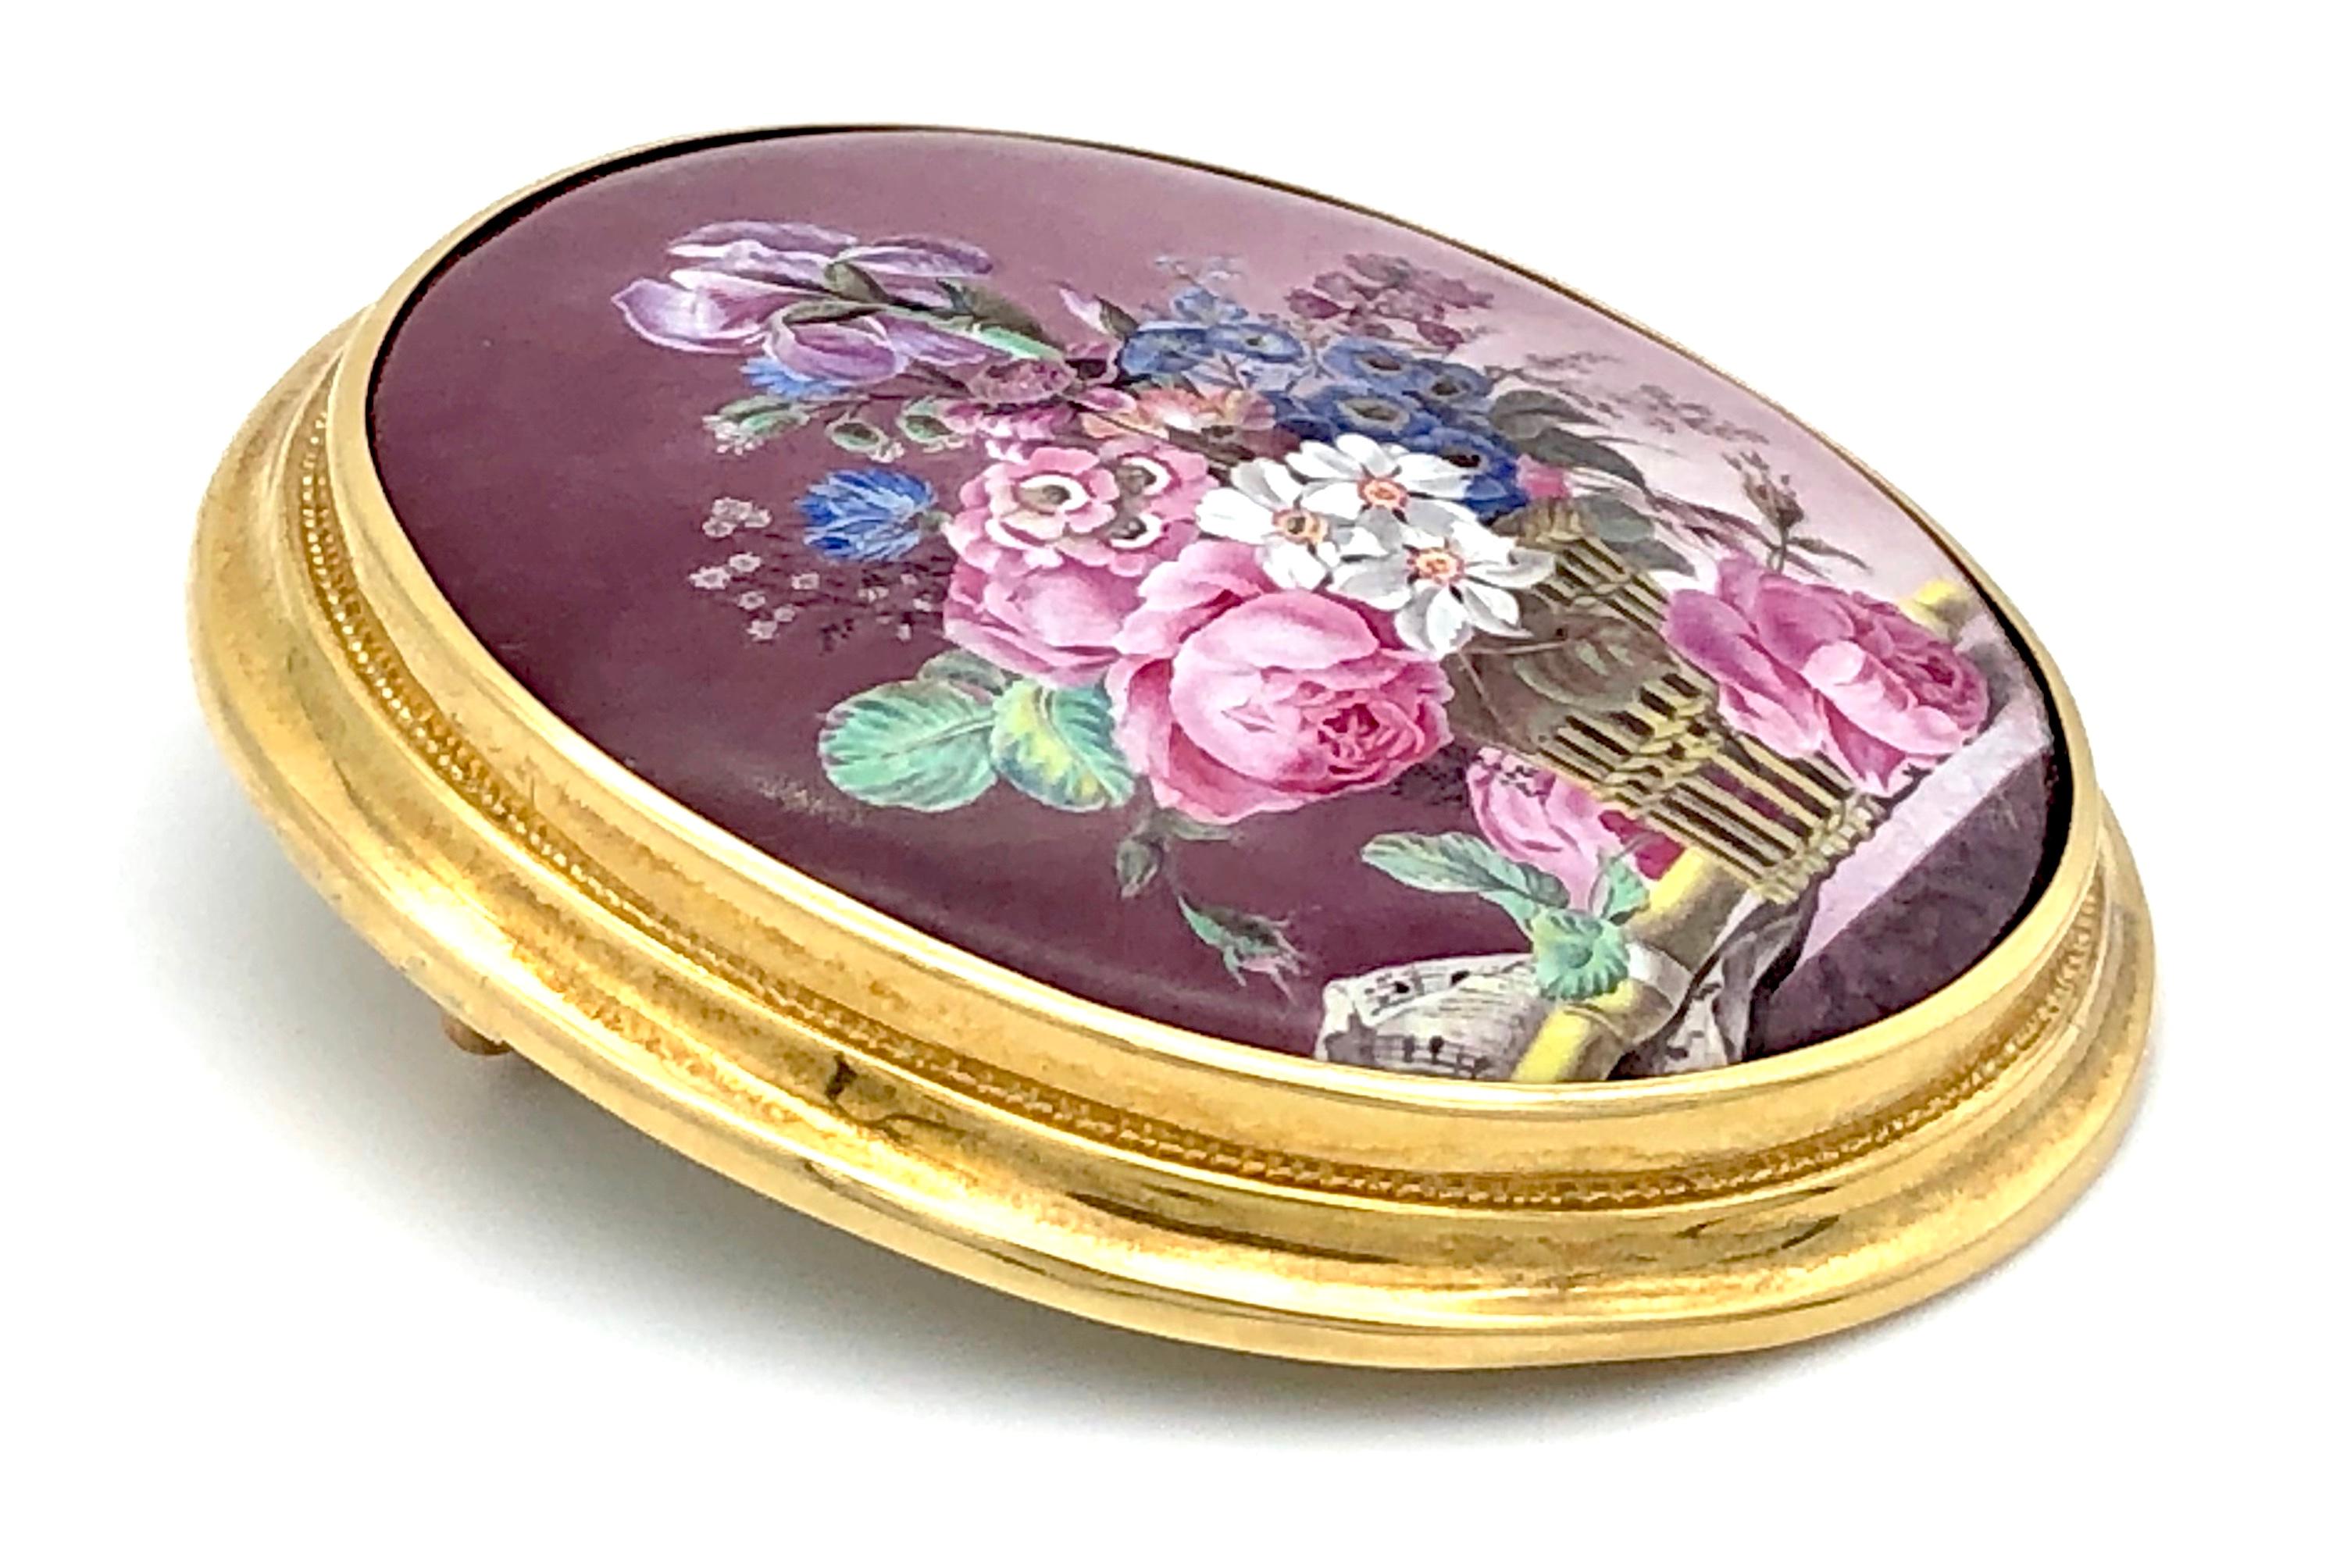 A flower bouquet in a basket, a flute and a sheet of music are composed to a still life of fabulous quality. The miniature is painted on porcelain. This most amazing work of art is mounted in an exquisite 18 k gold frame and can be worn as a brooch.